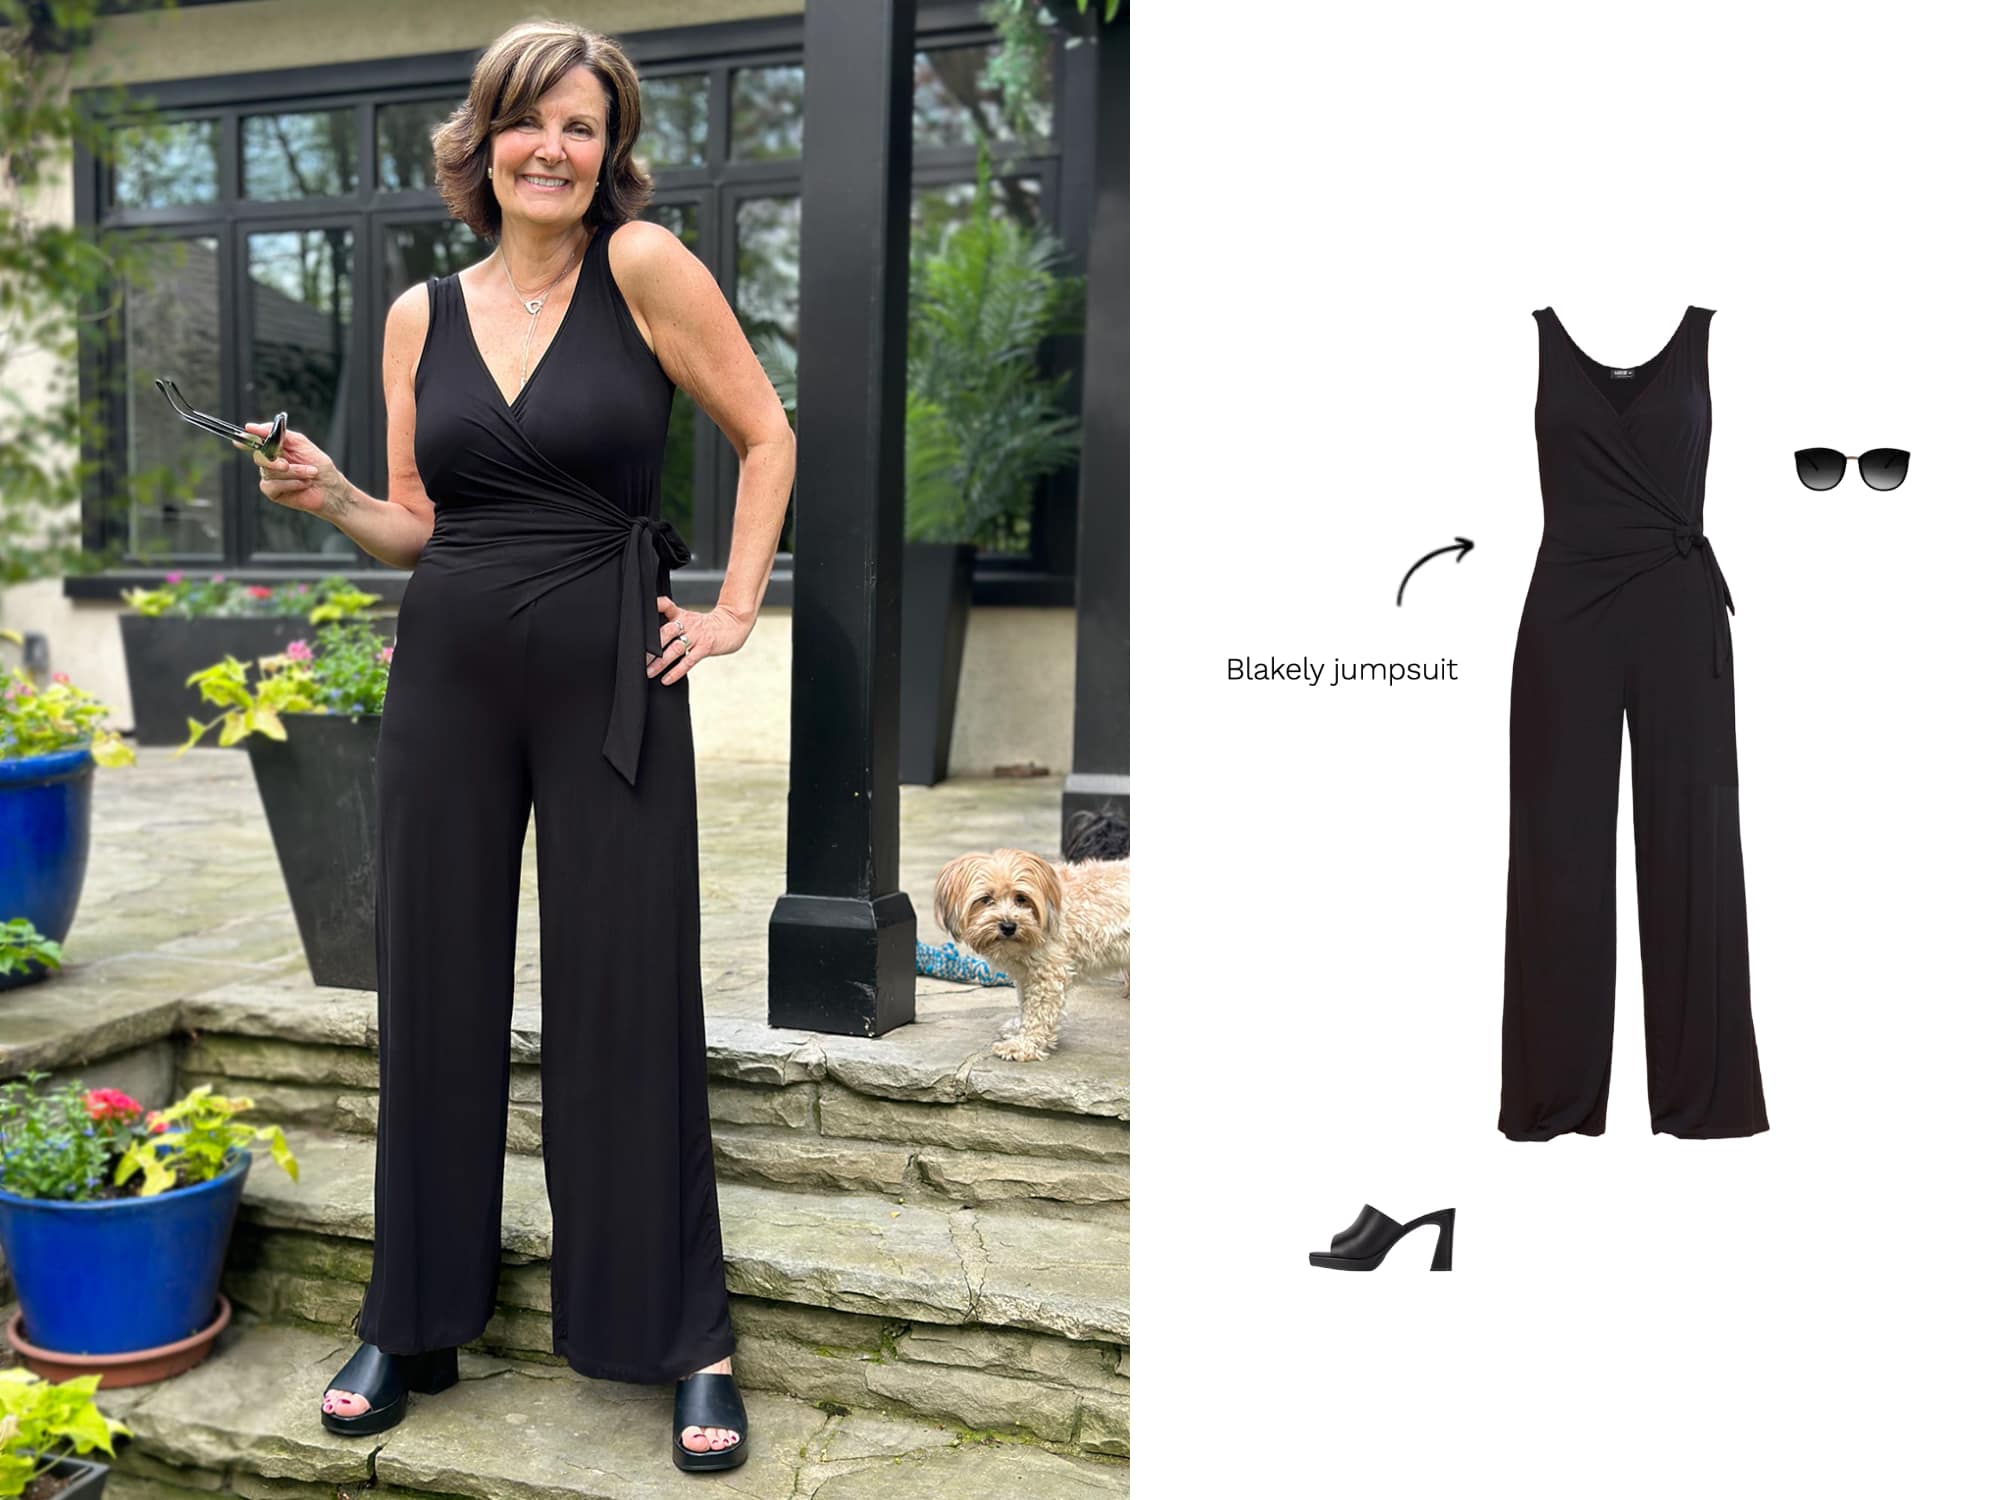 Wedding guest outfit ideas with the outfit on the left and the clothing graphics to the right